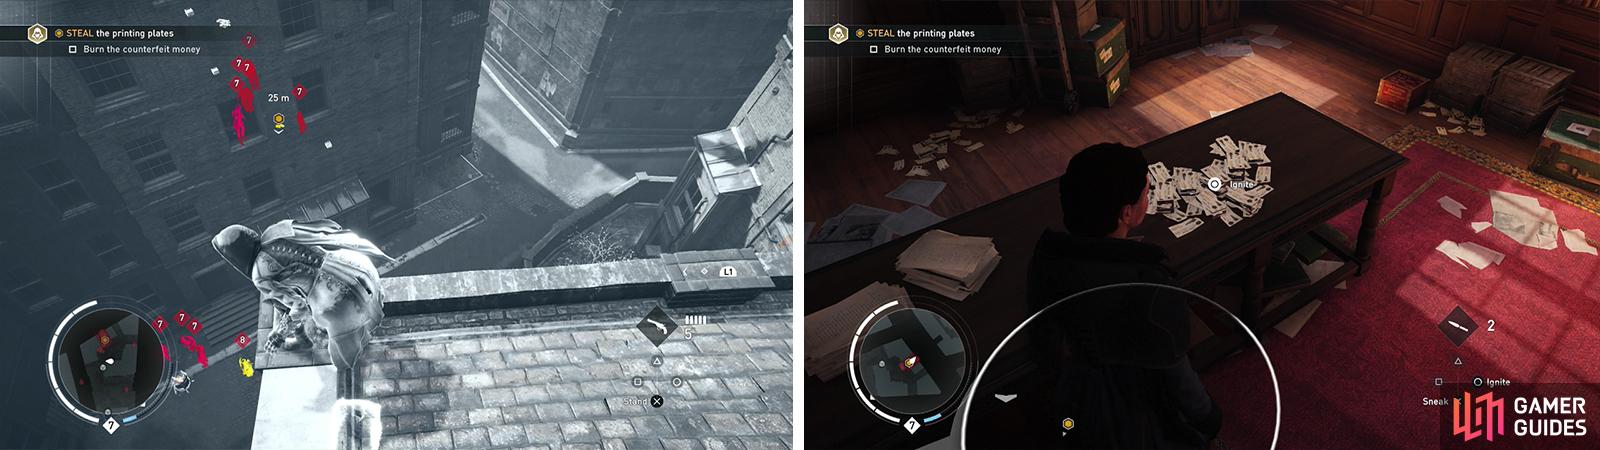 There are plenty of enemies guarding the plates (left) so its easier to enter via the window. Once inside, be sure to burn the fake money (right) before leaving.